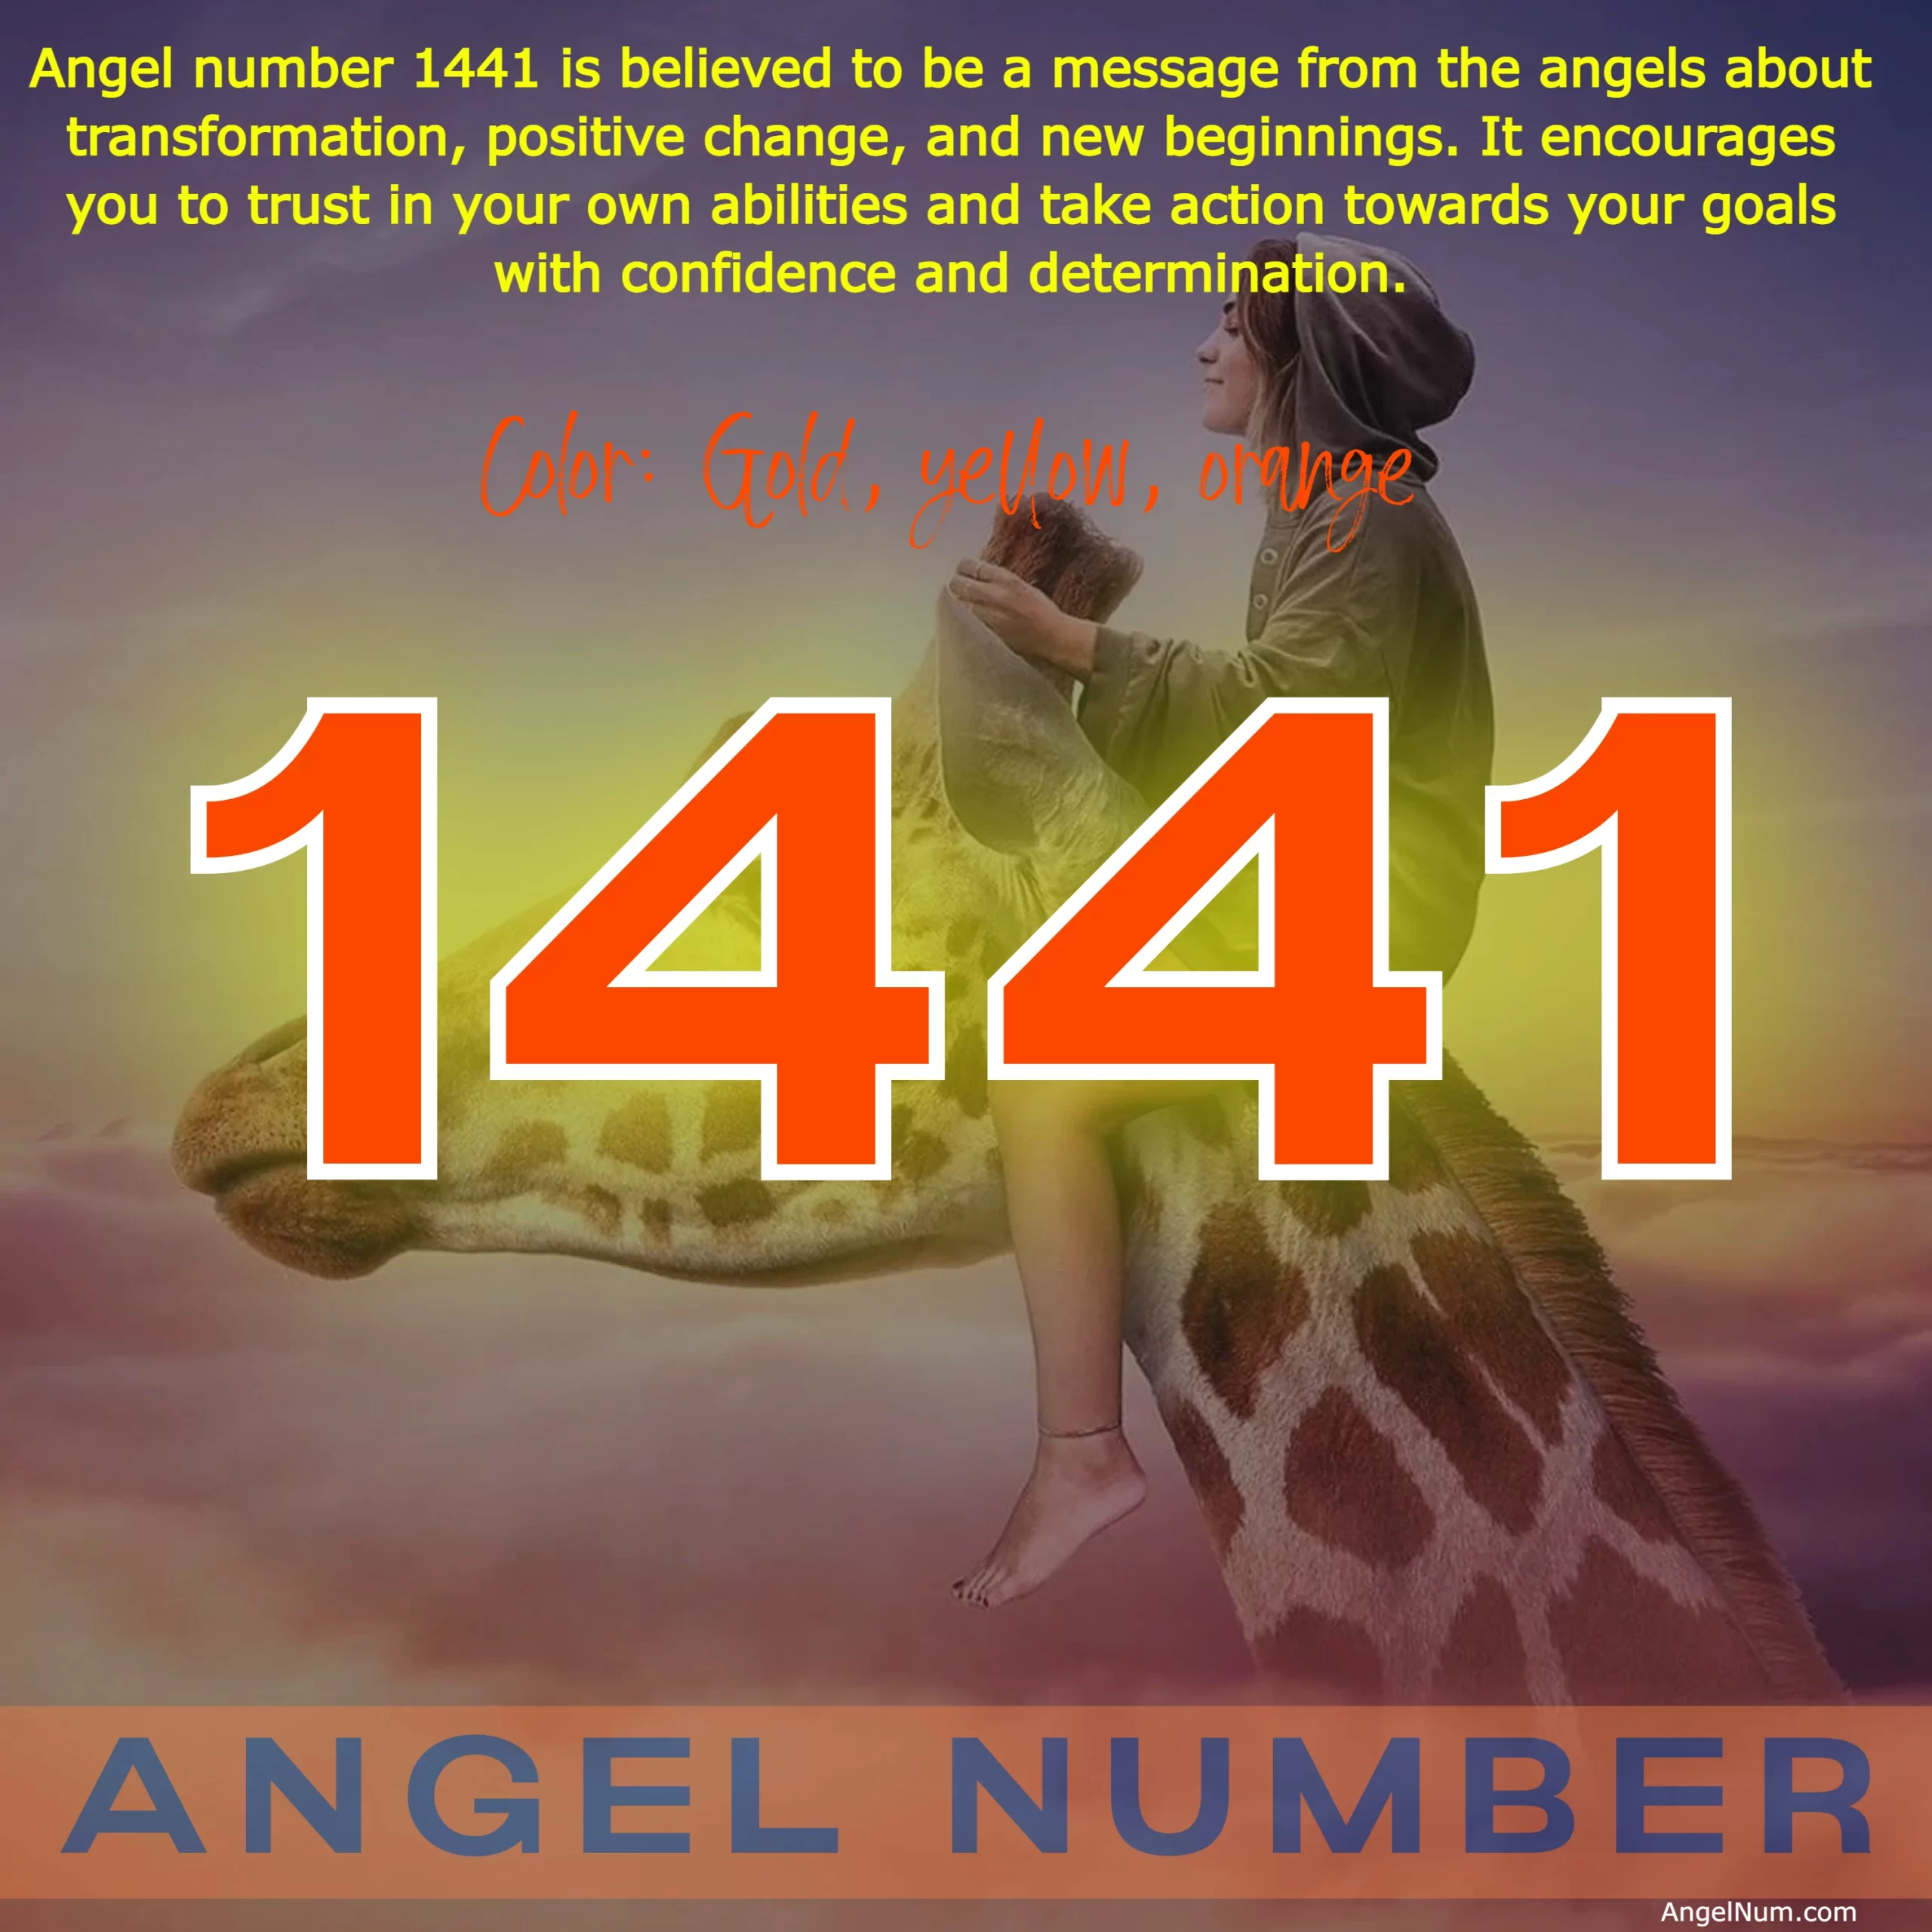 Angel Number 1441: The Significance of Transformation and New Beginnings